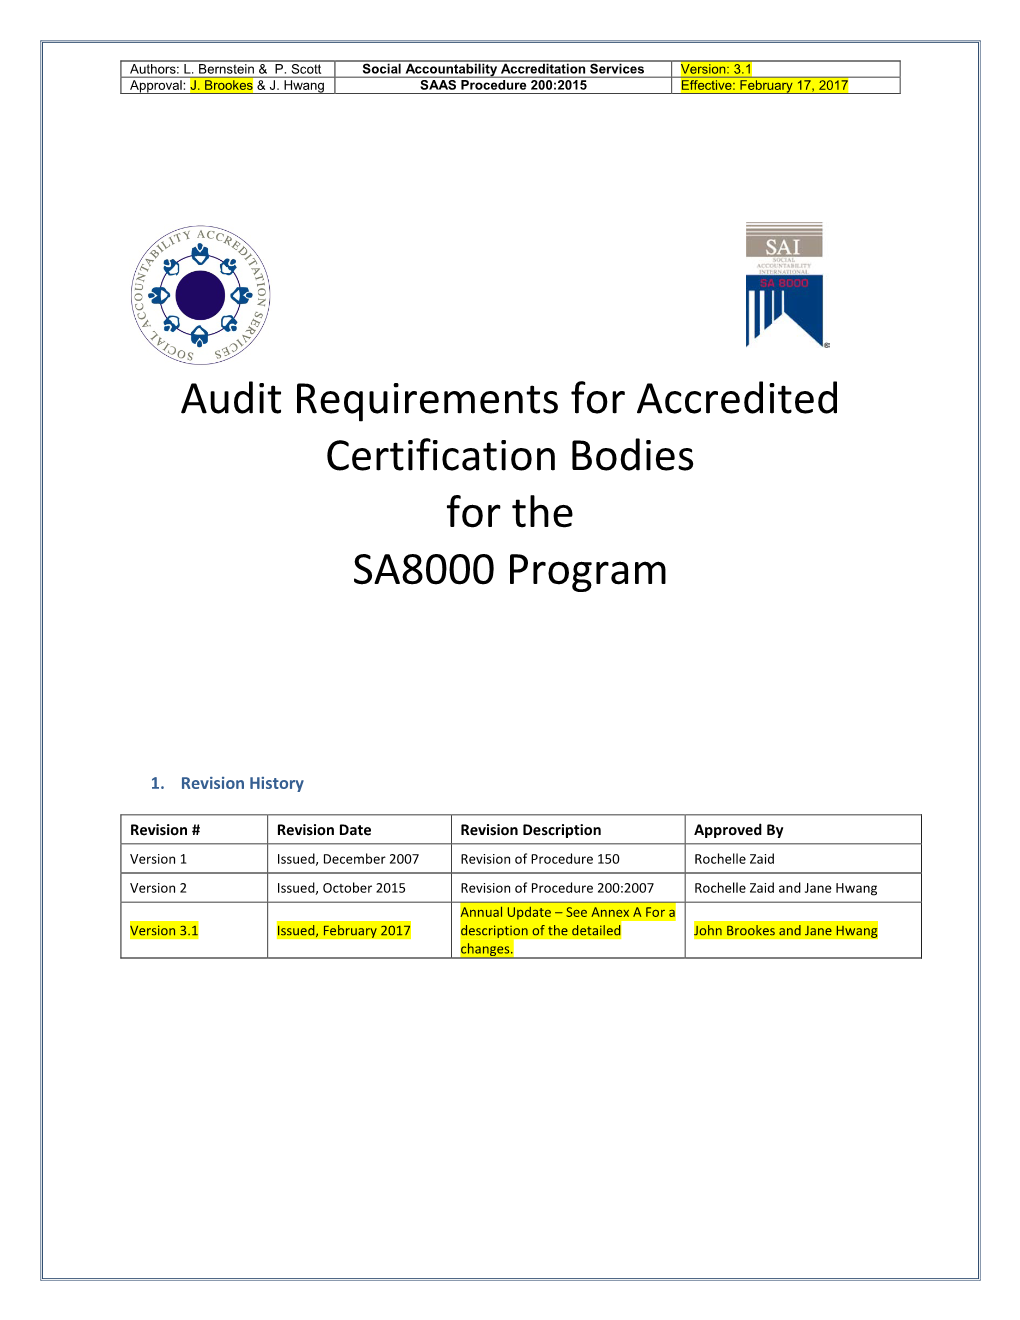 Audit Requirements for Accredited Certification Bodies for the SA8000 Program